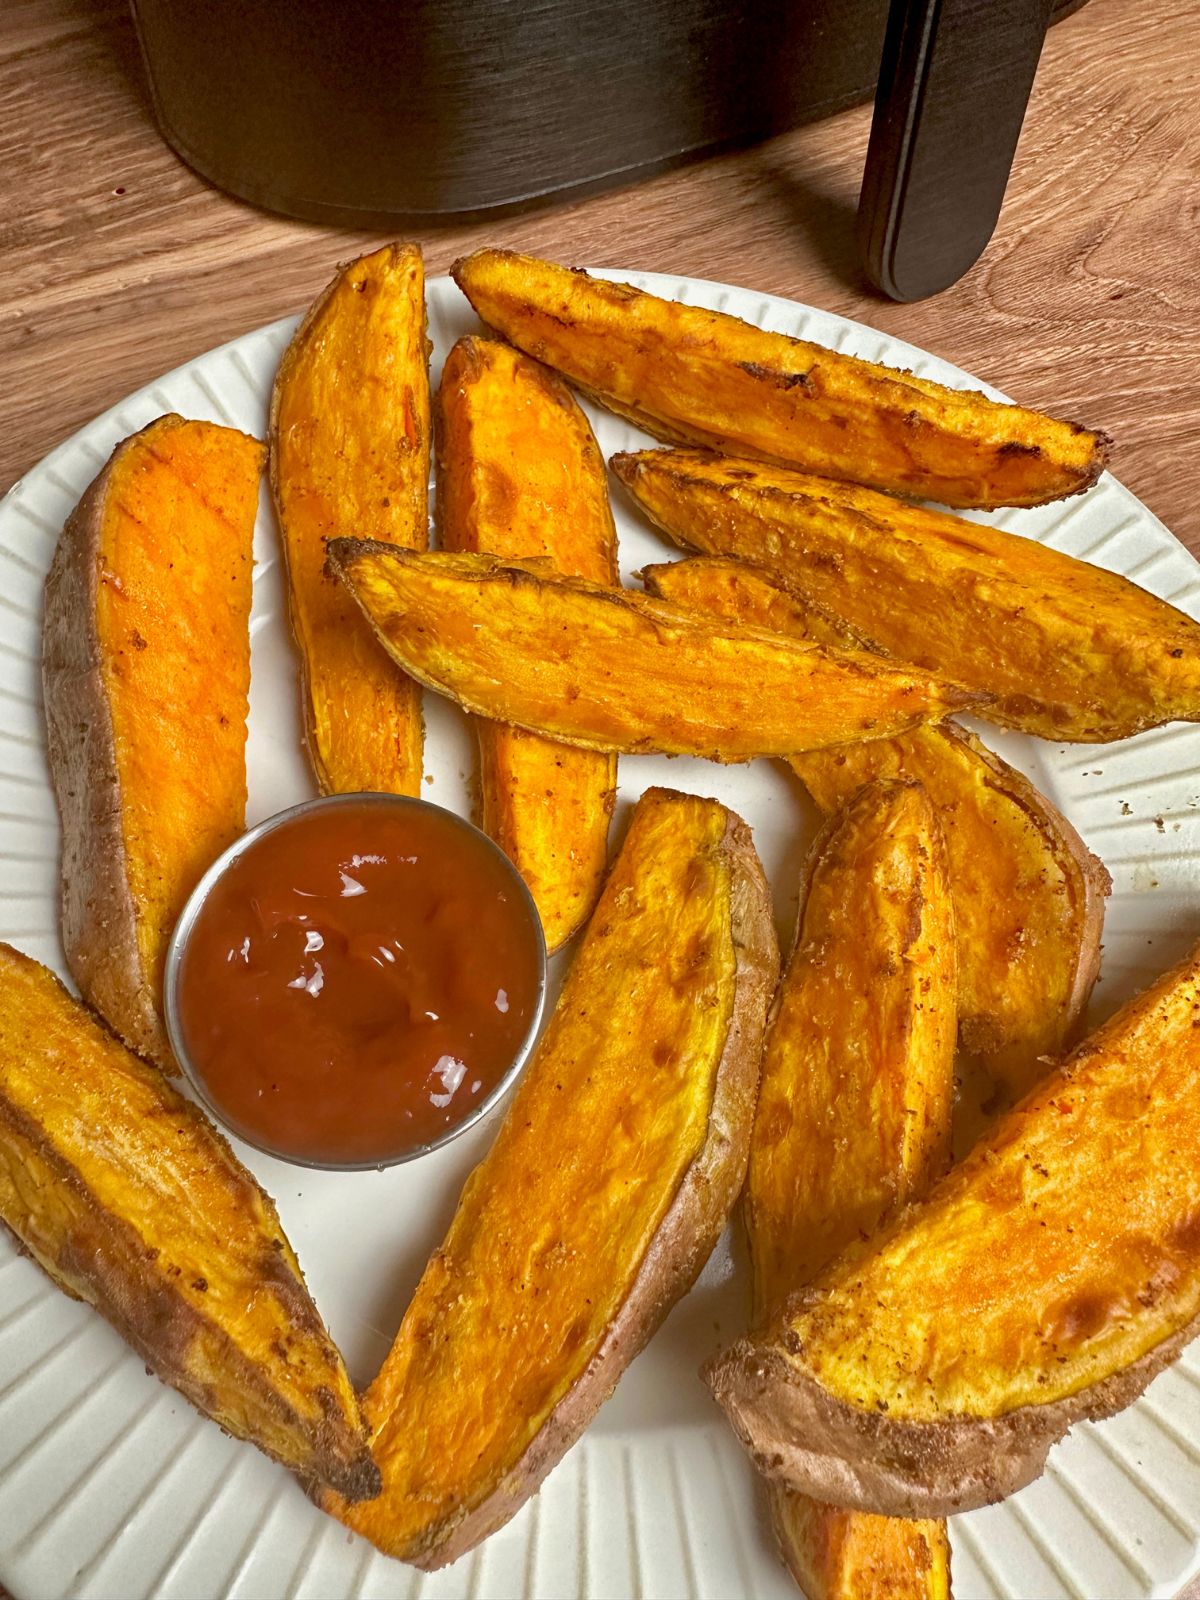 Sweet potato wedges on a white plate with condiment cup of ketchup with air fryer based in background.